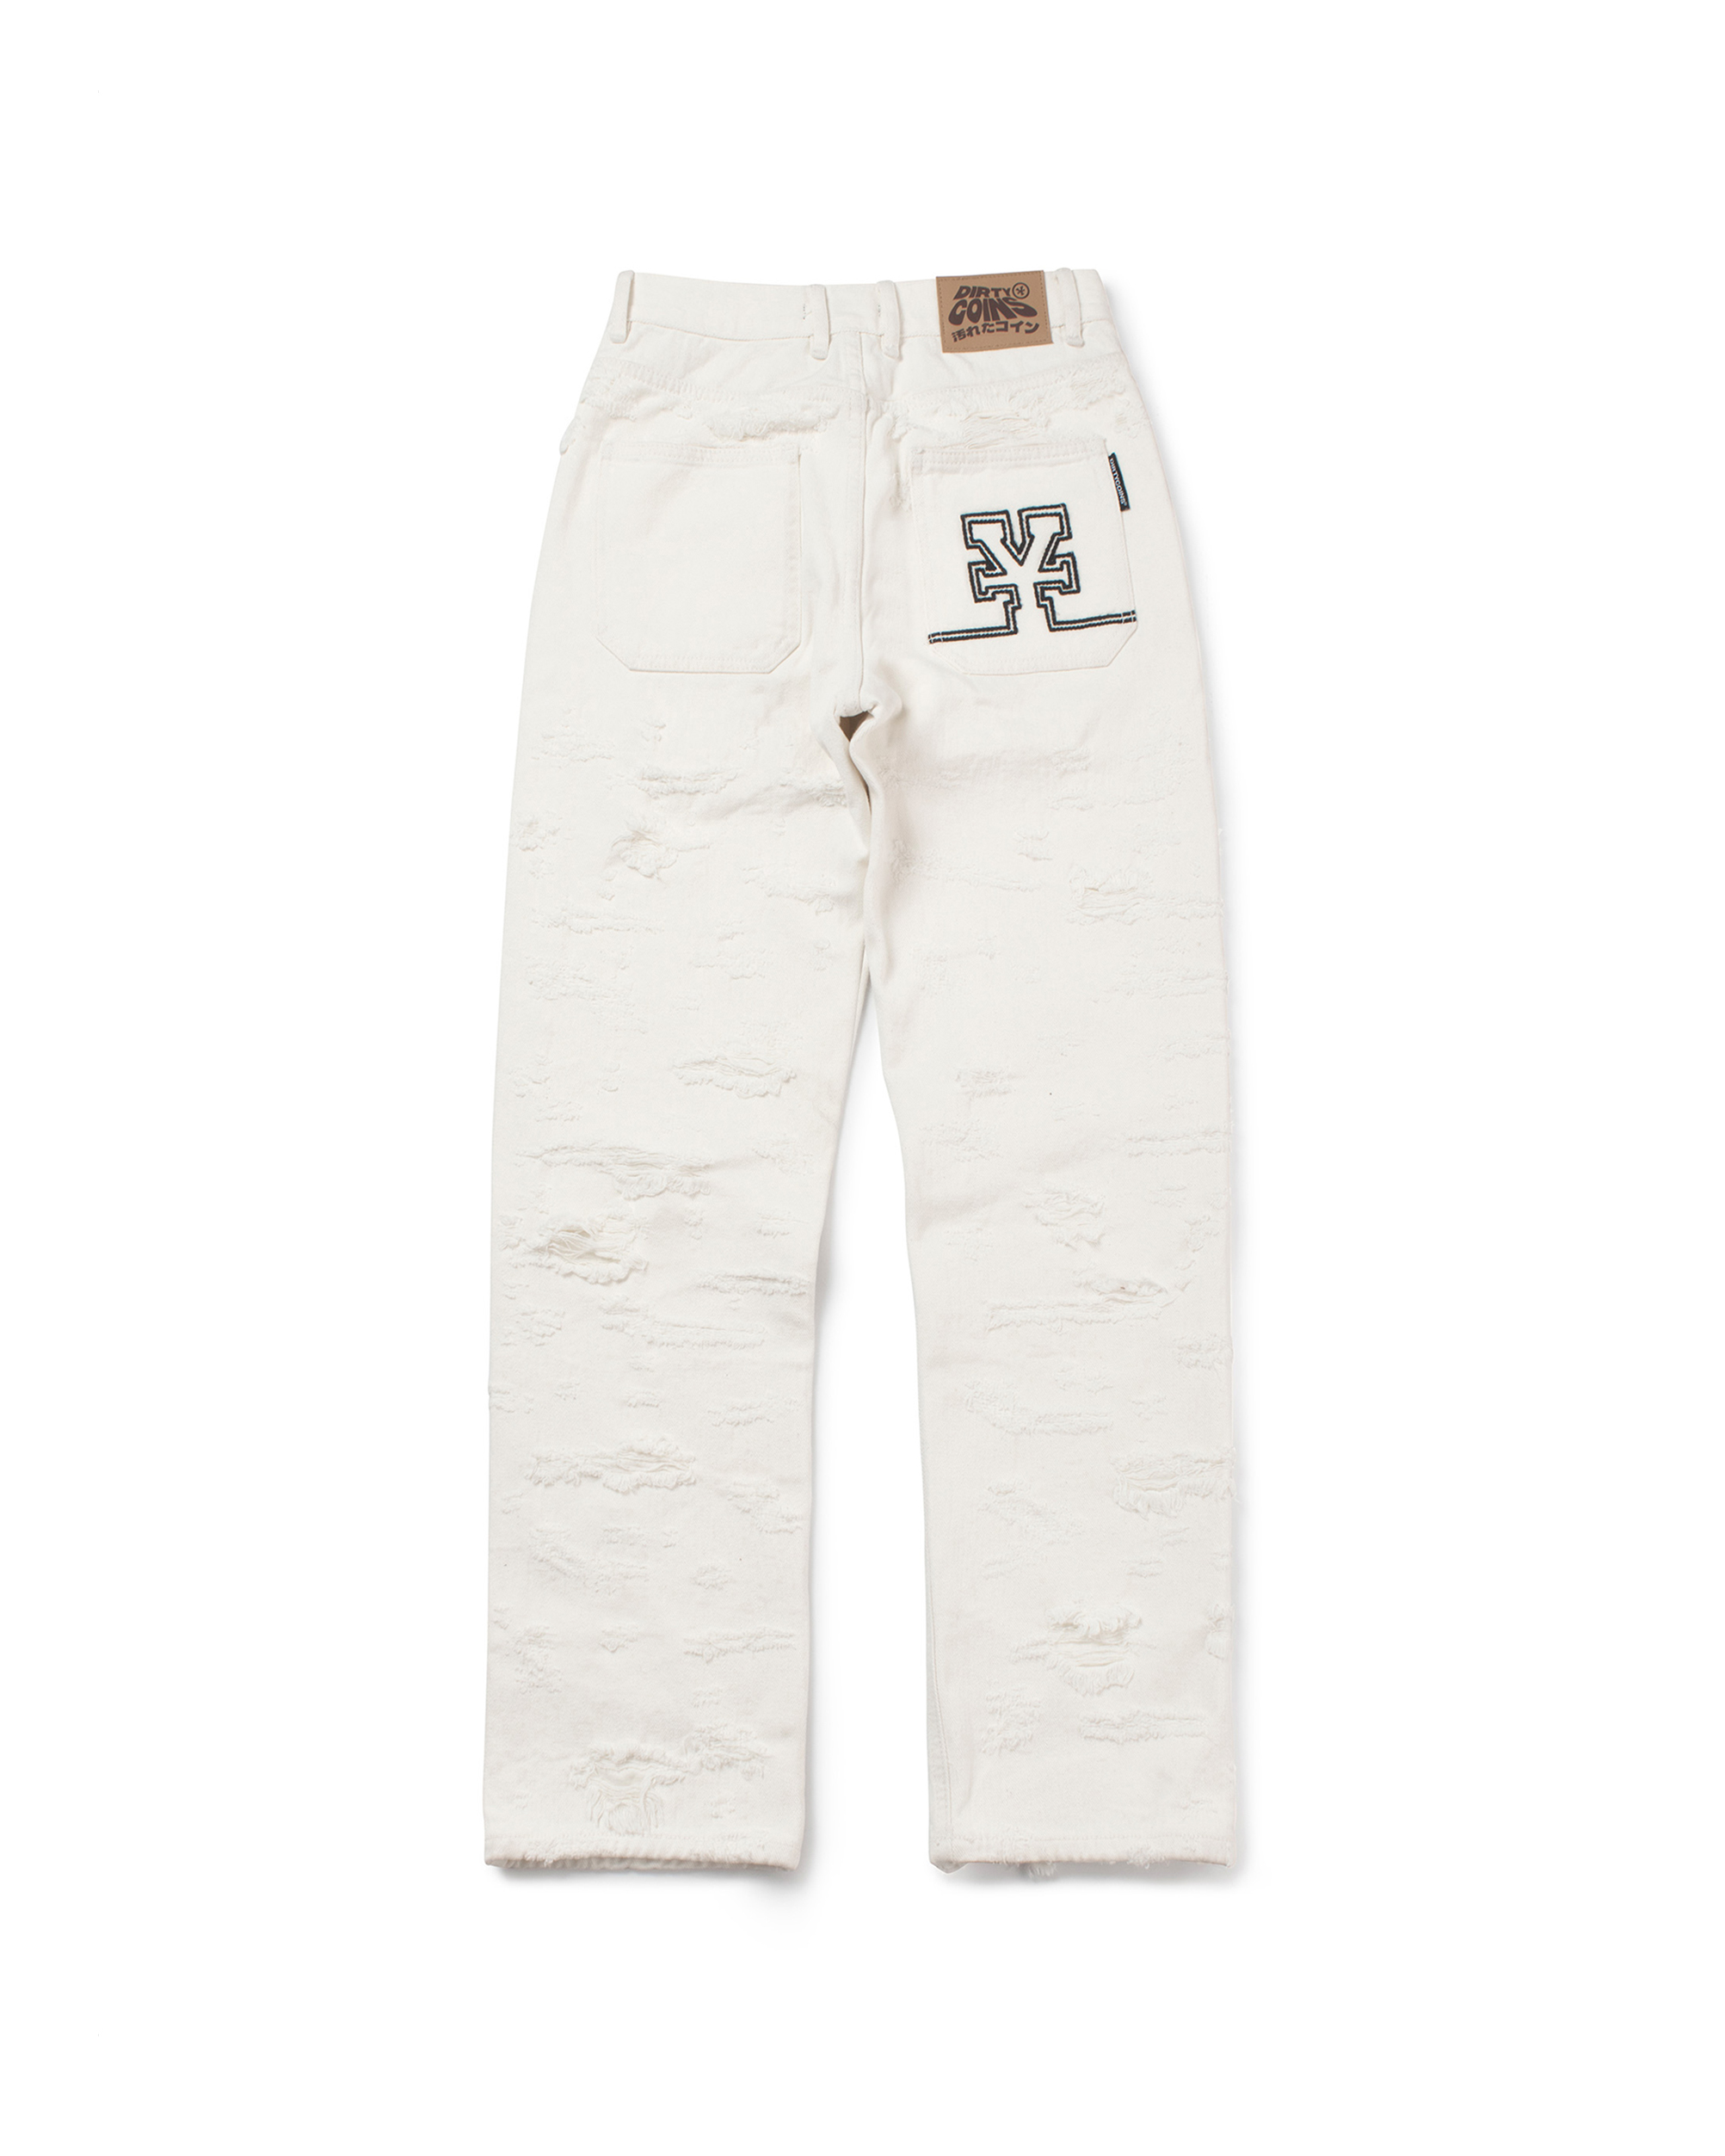 Over Distressed Jeans - White